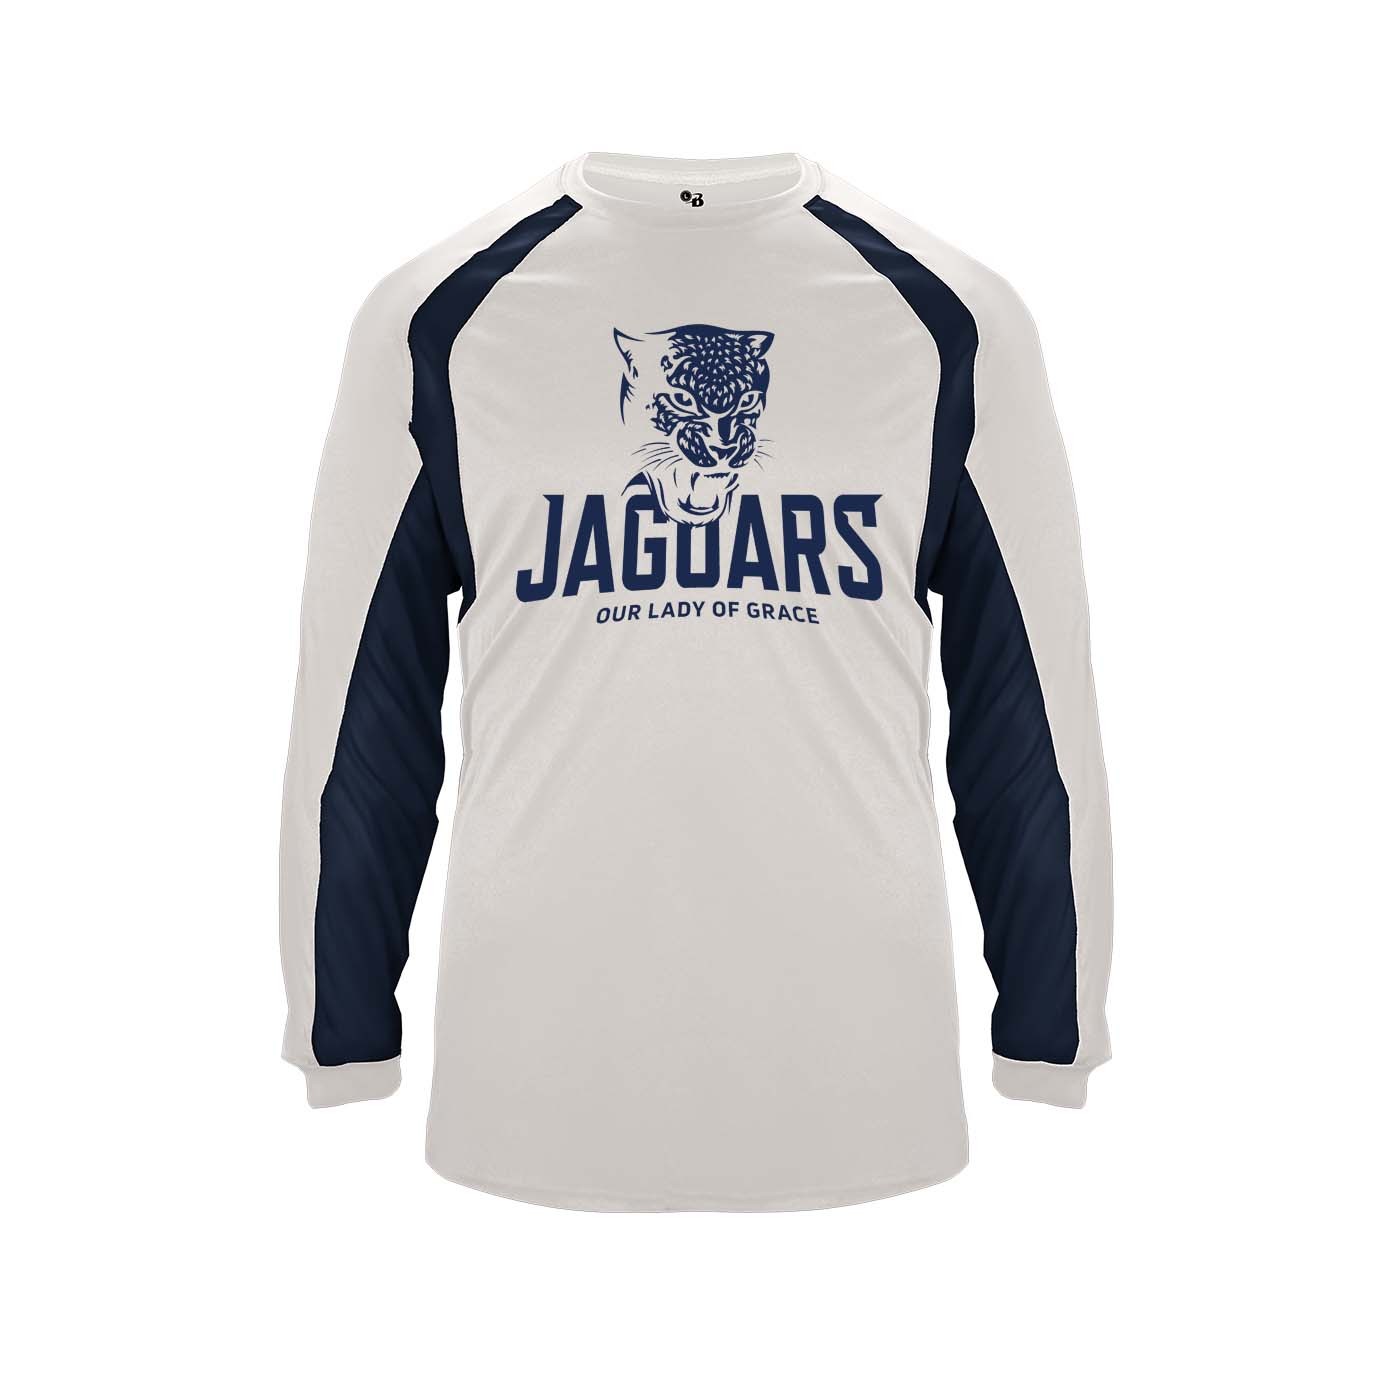 OLG Staff Hook L/S T-Shirt w/ Navy Logo #F19 - Please Allow 3-4 Weeks for Delivery